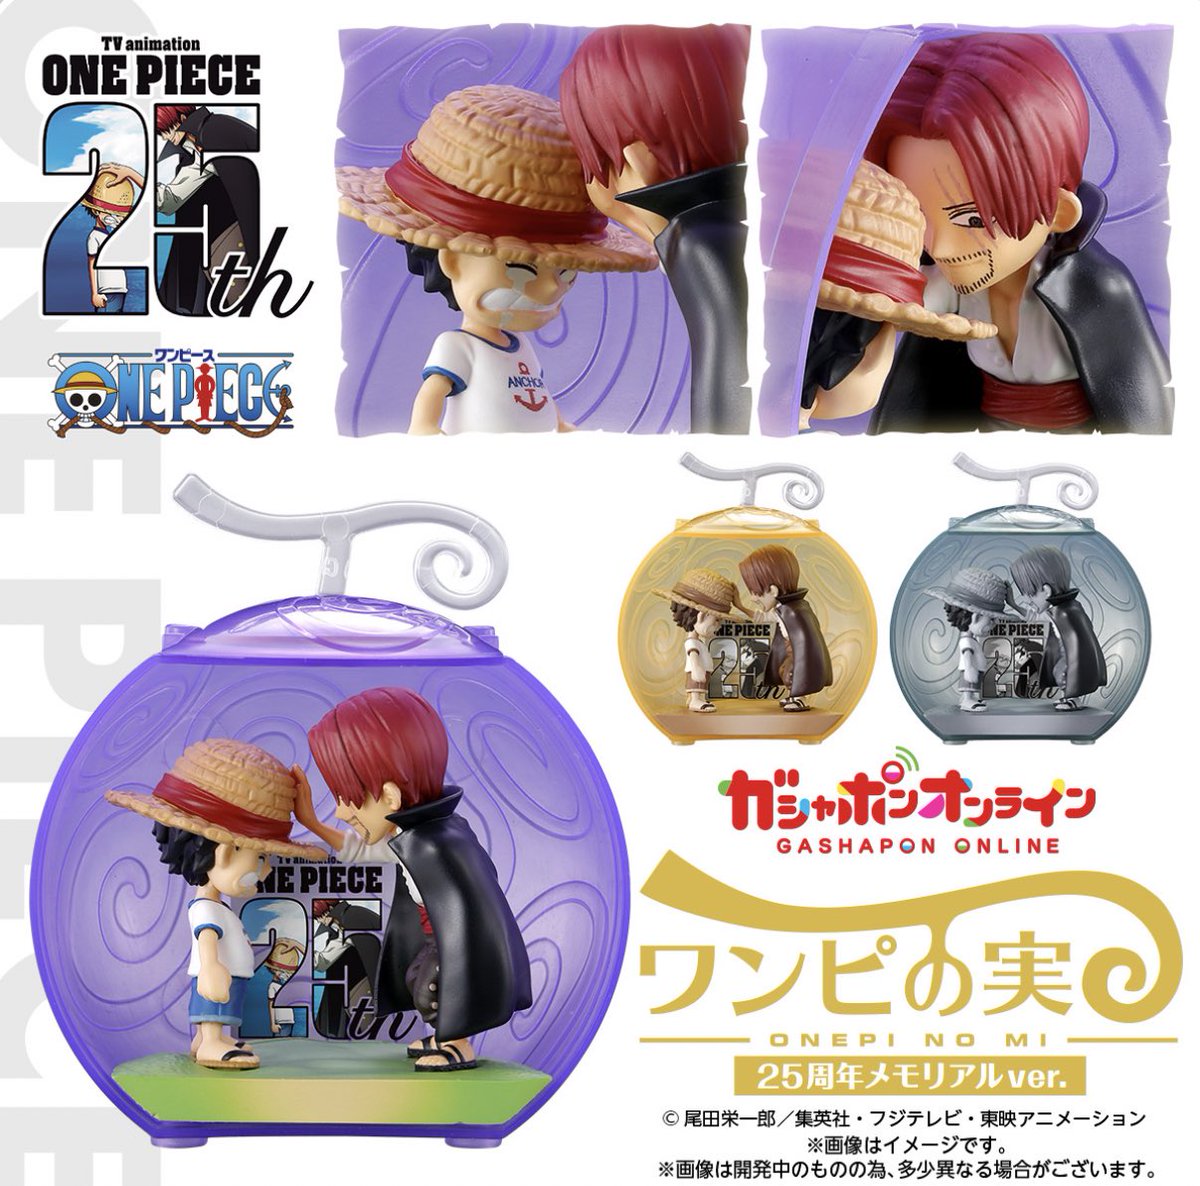 These 25th Anniversary figures with Luffy and Shanks are adorable 😍❤️ I want them 🥰